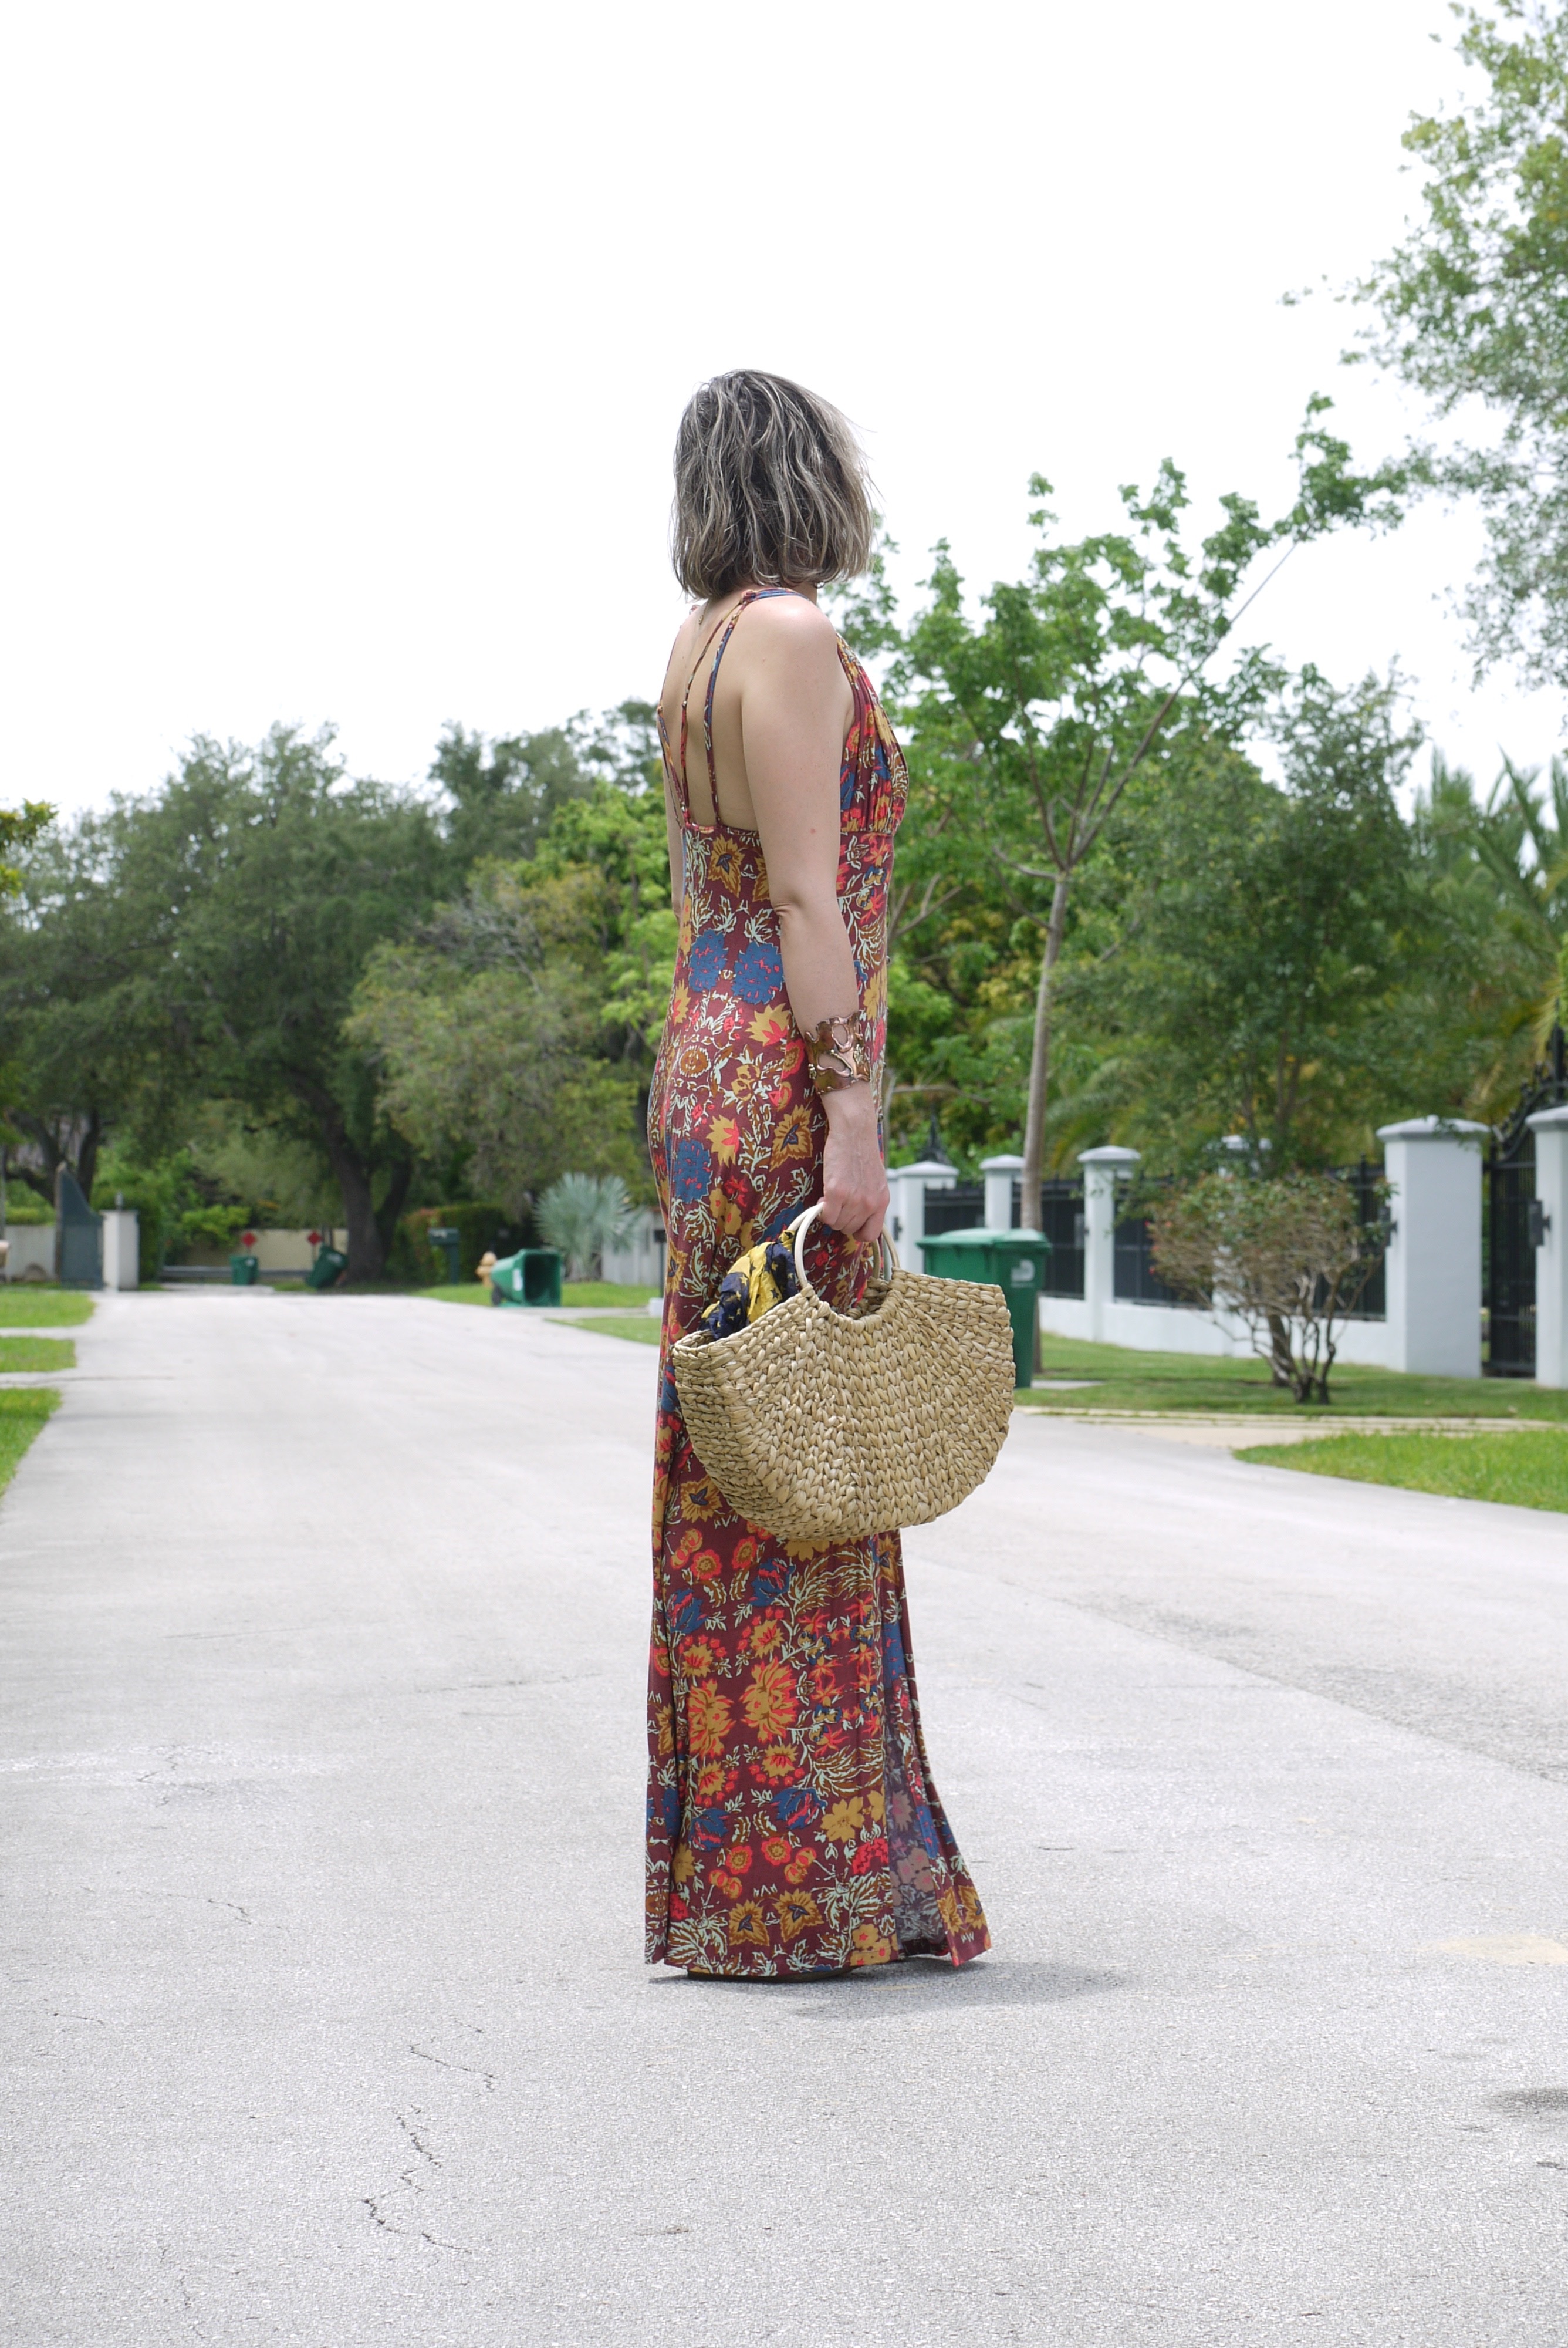 Alba Marina blogger from My lovely people blog is sharing with all of you a love story from her homeland Cuba, wearing a maxi dress from Free People